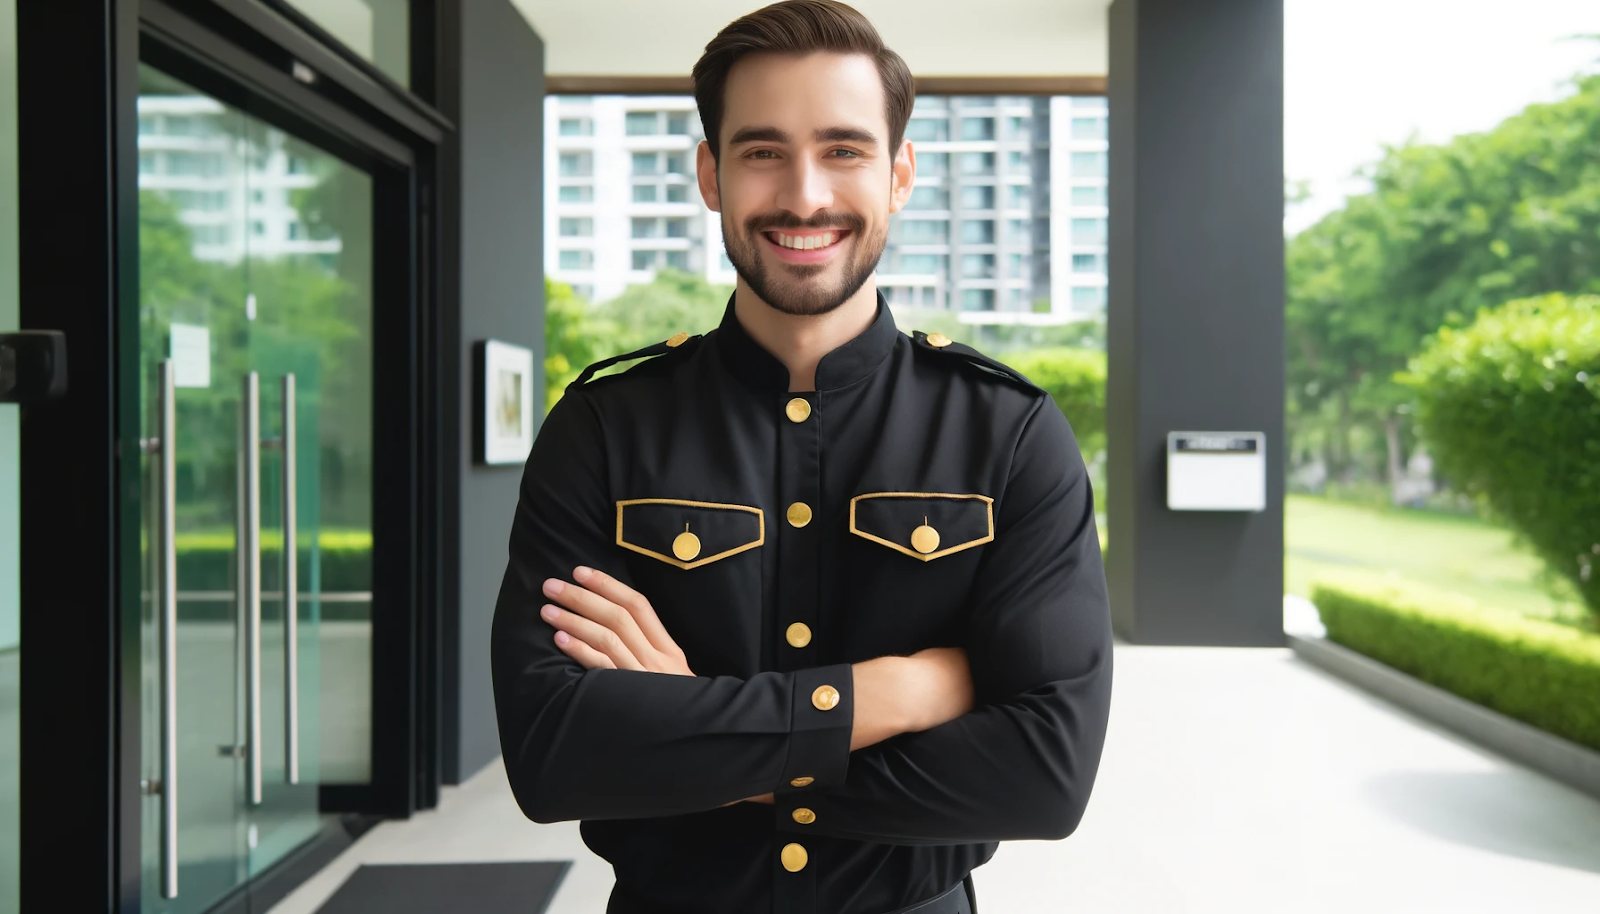 Cheerful security guard in black and gold uniform, representing the importance of occupational health checks for security personnel.